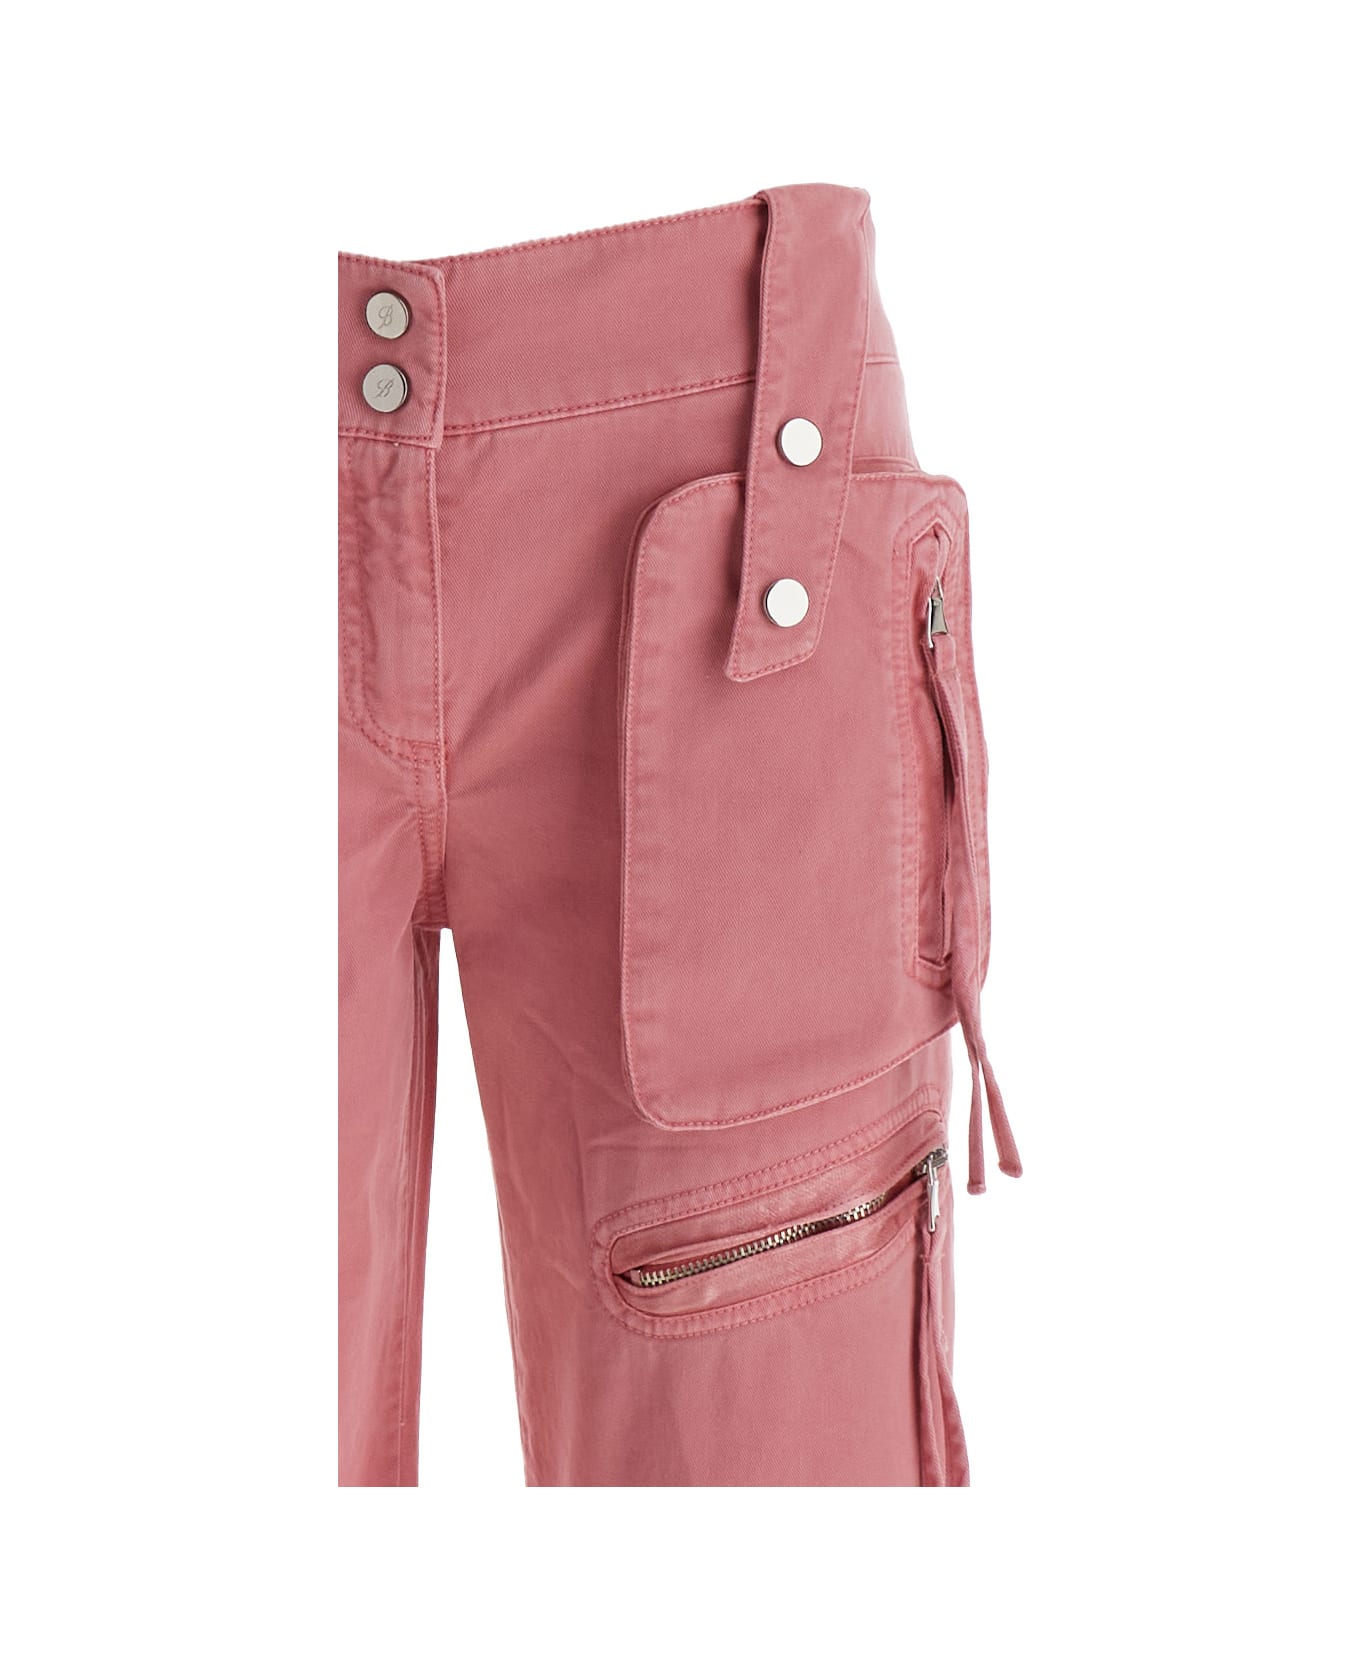 Blumarine Pink Cargo Trousers With Satin Inserts In Cotton Woman - Pink